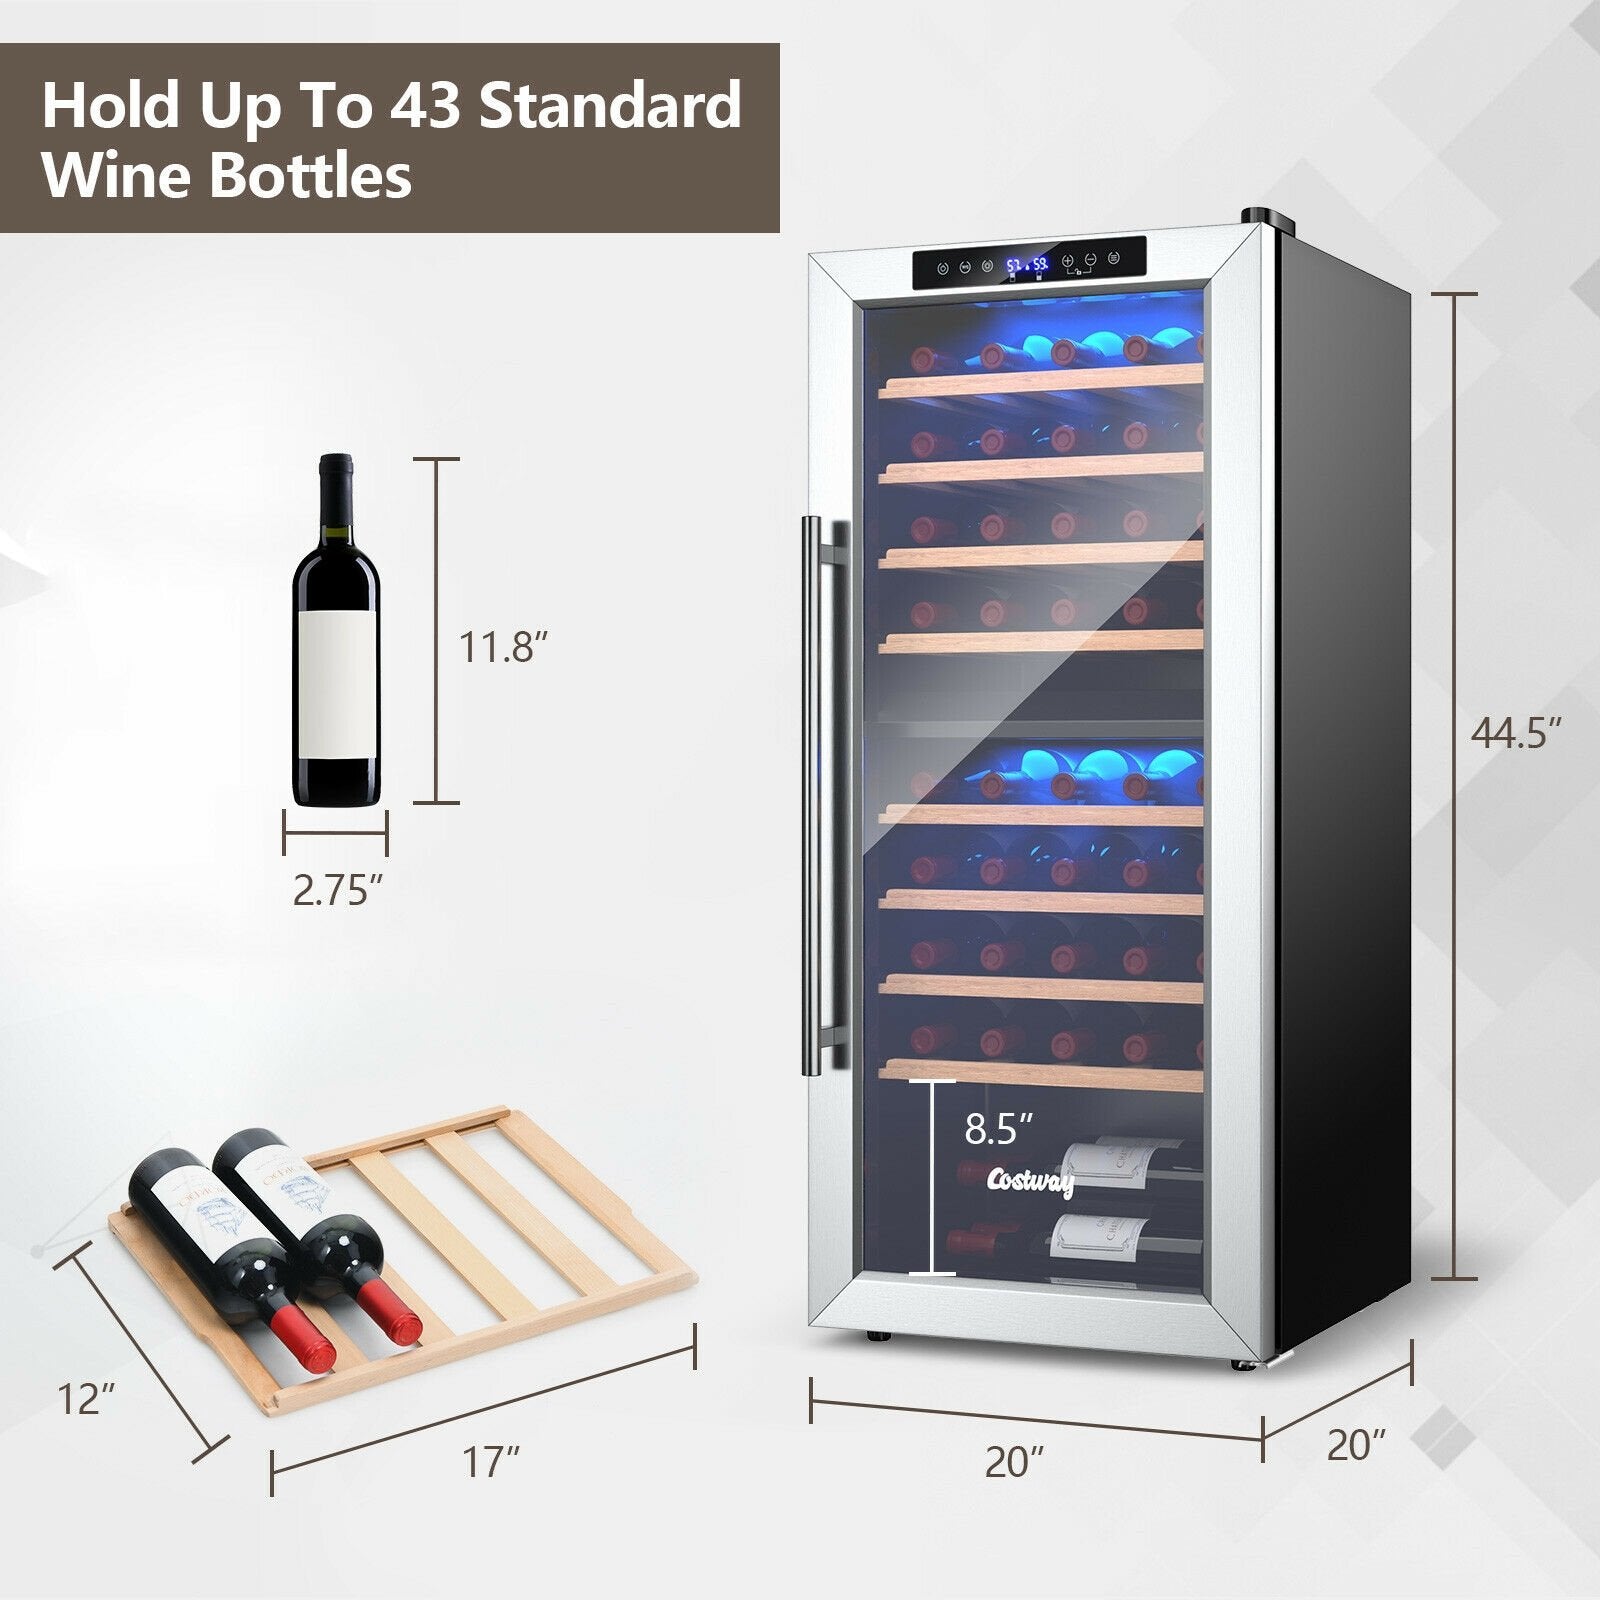 43 Bottle Wine Cooler Refrigerator Dual Zone Temperature Control with 8 Shelves, Black at Gallery Canada